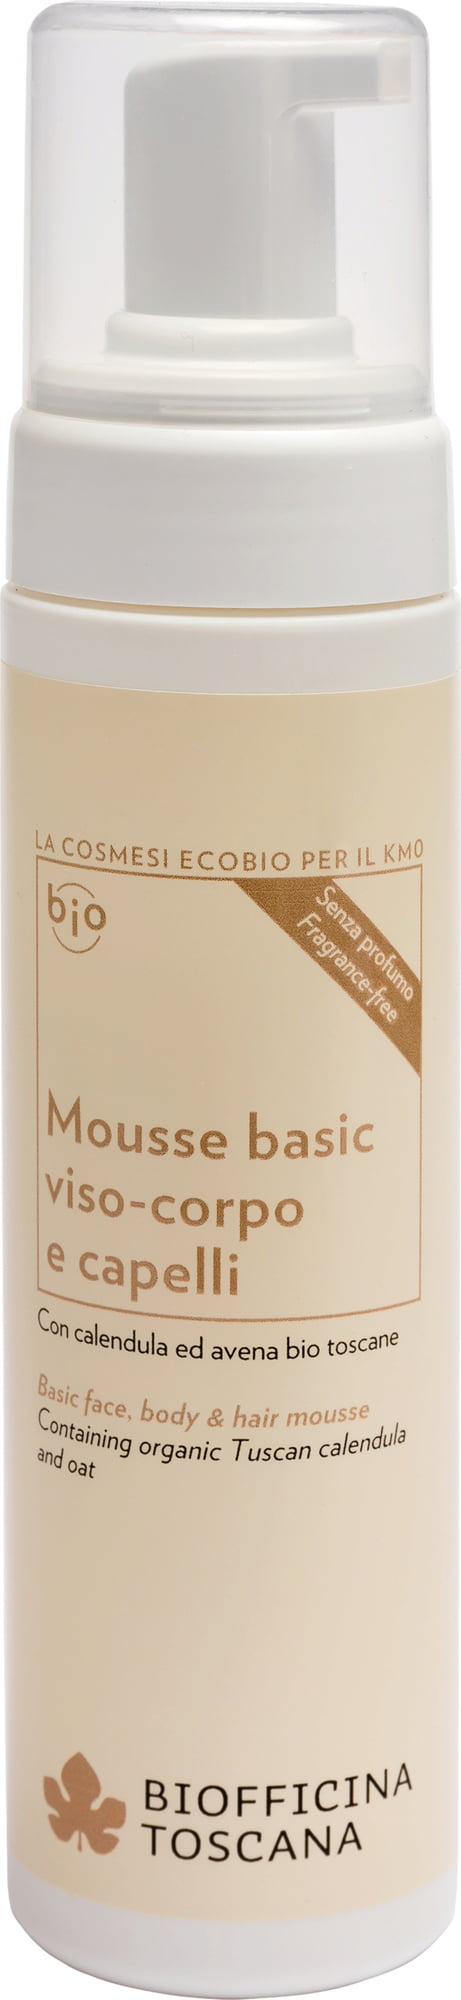 Biofficina Toscana Basic Cleansing Mousse